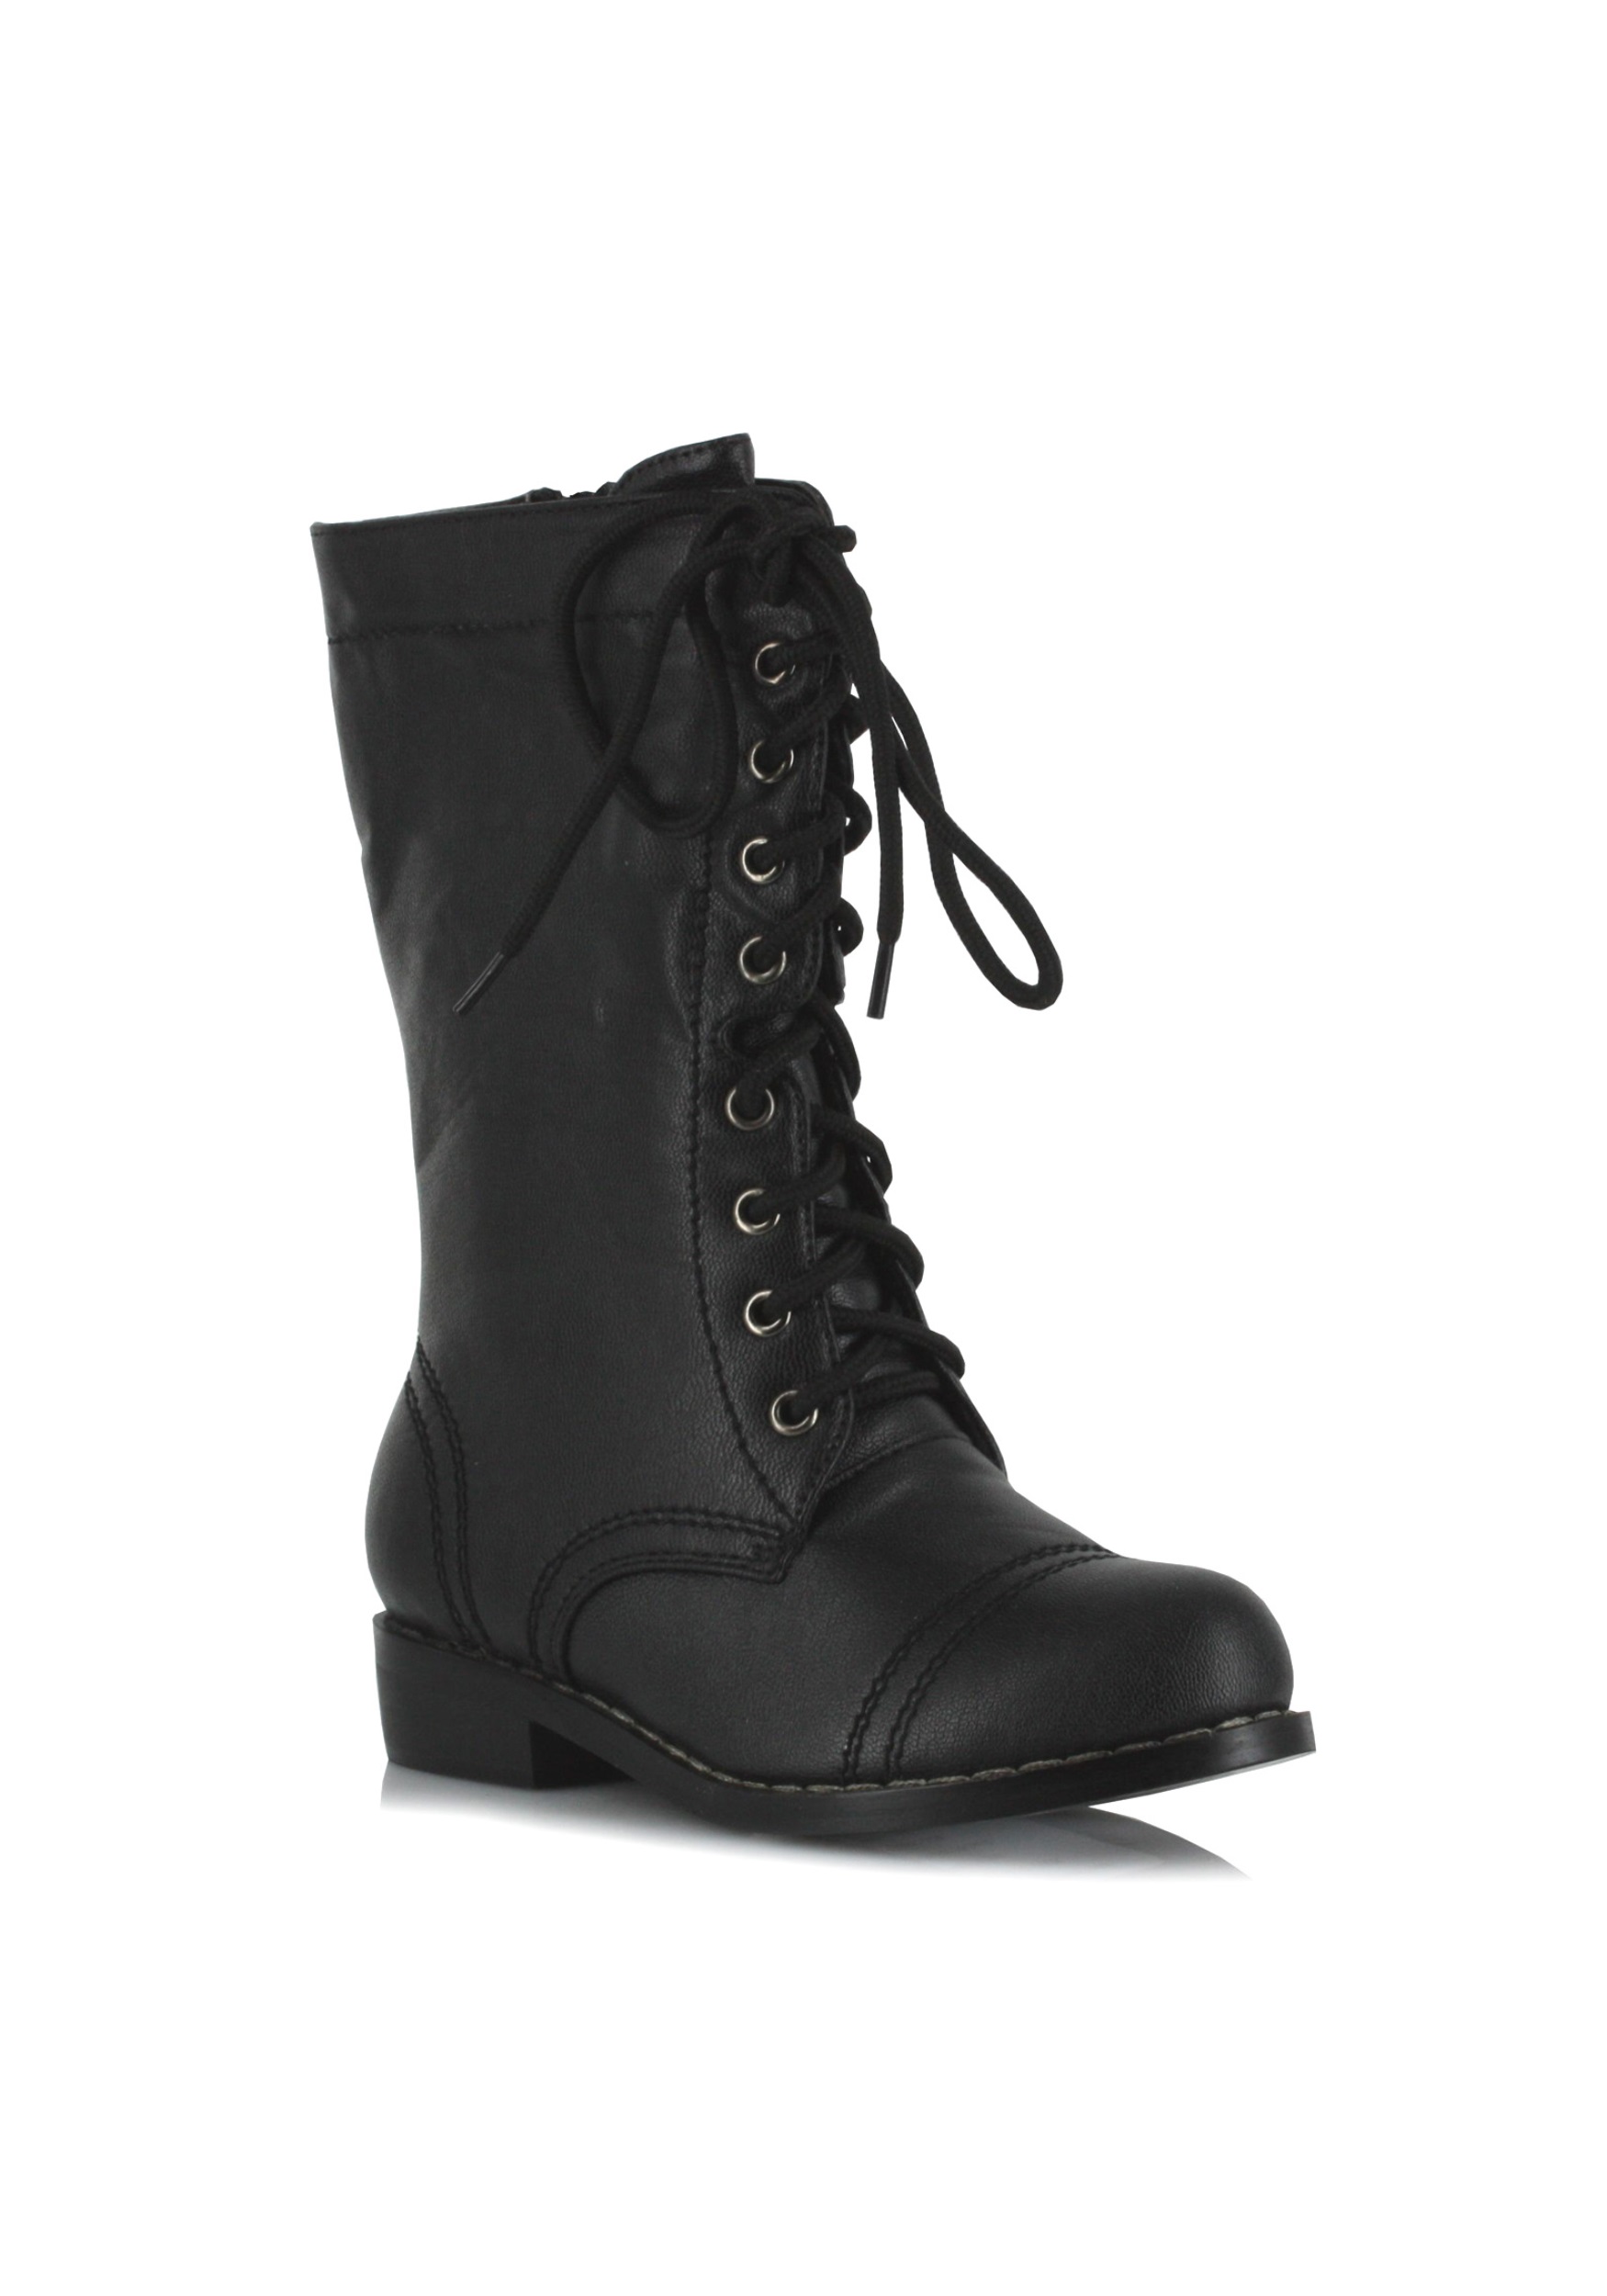 Black Costume Military Boots for Kids